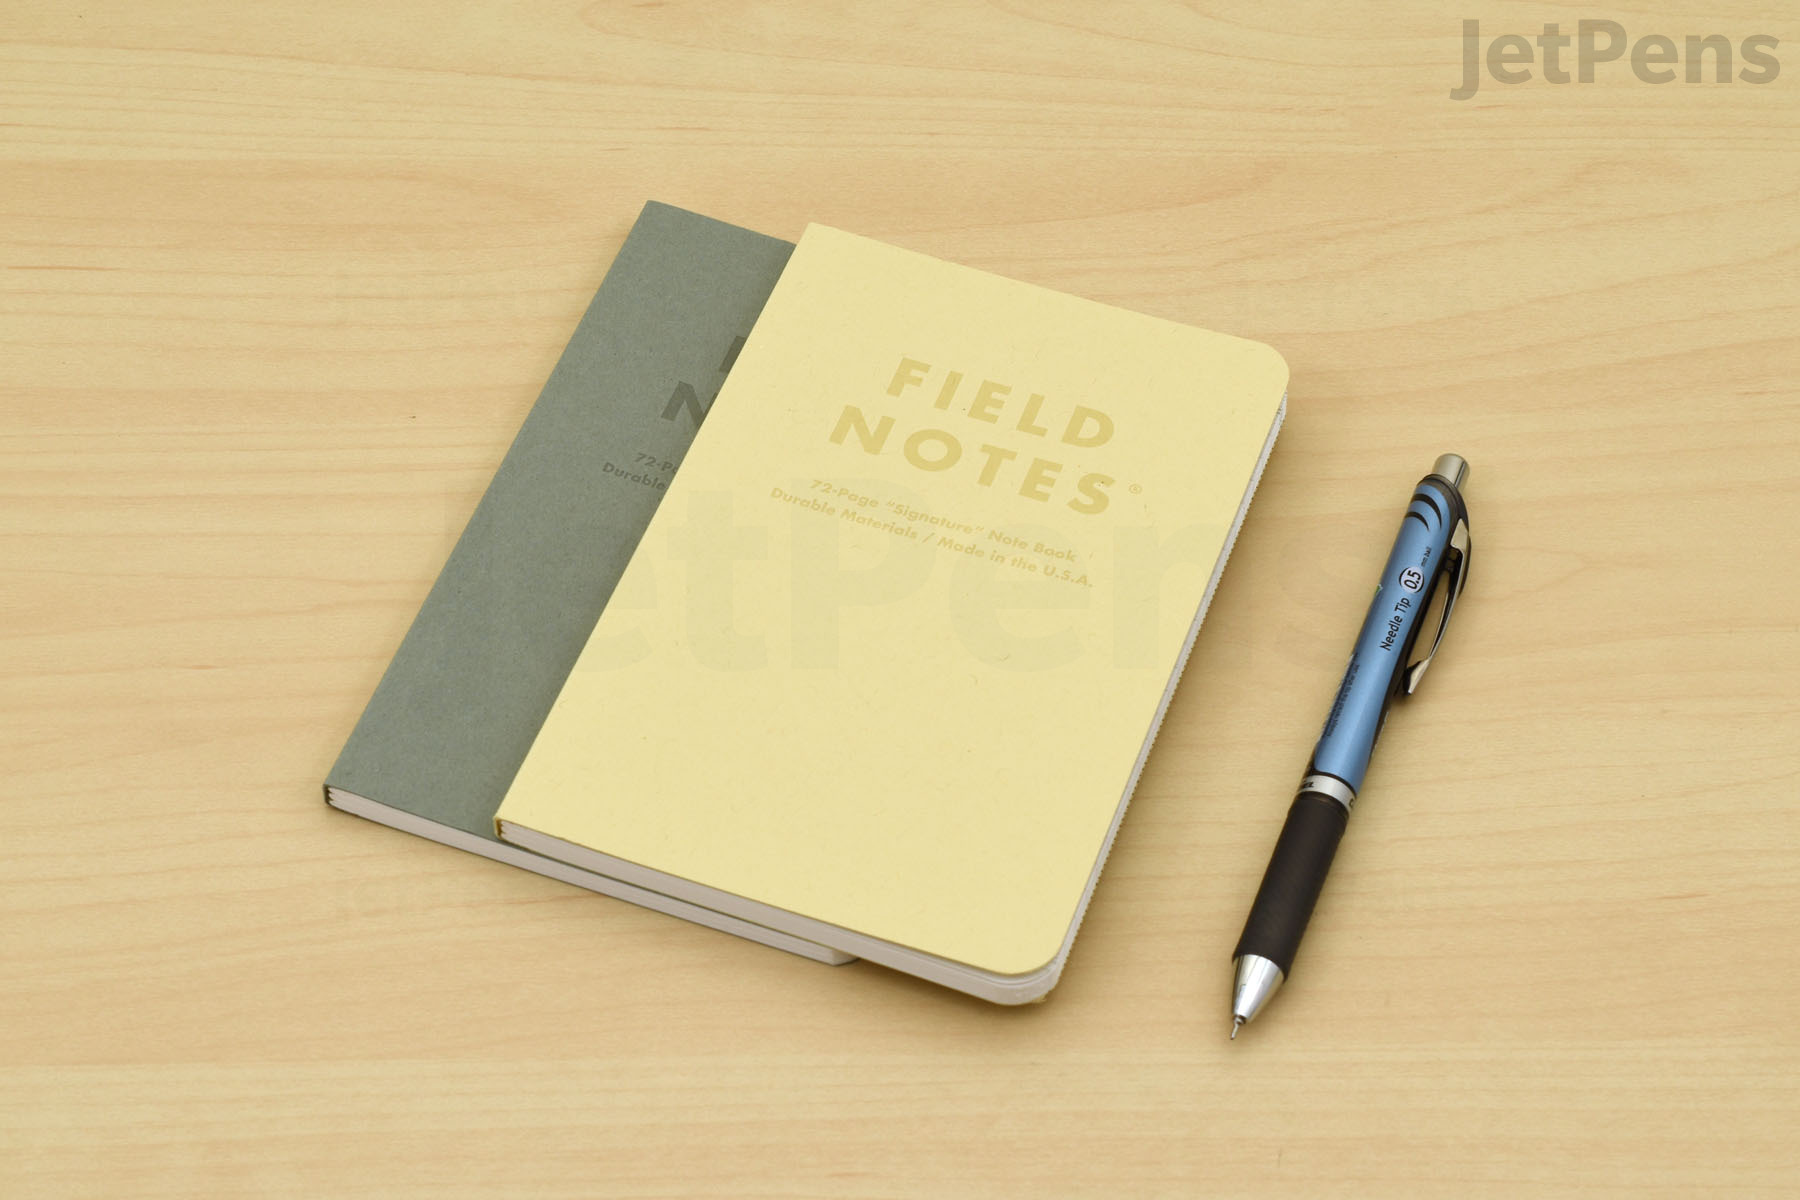 The Best Notebooks For Every Use 2019 Review Jetpens